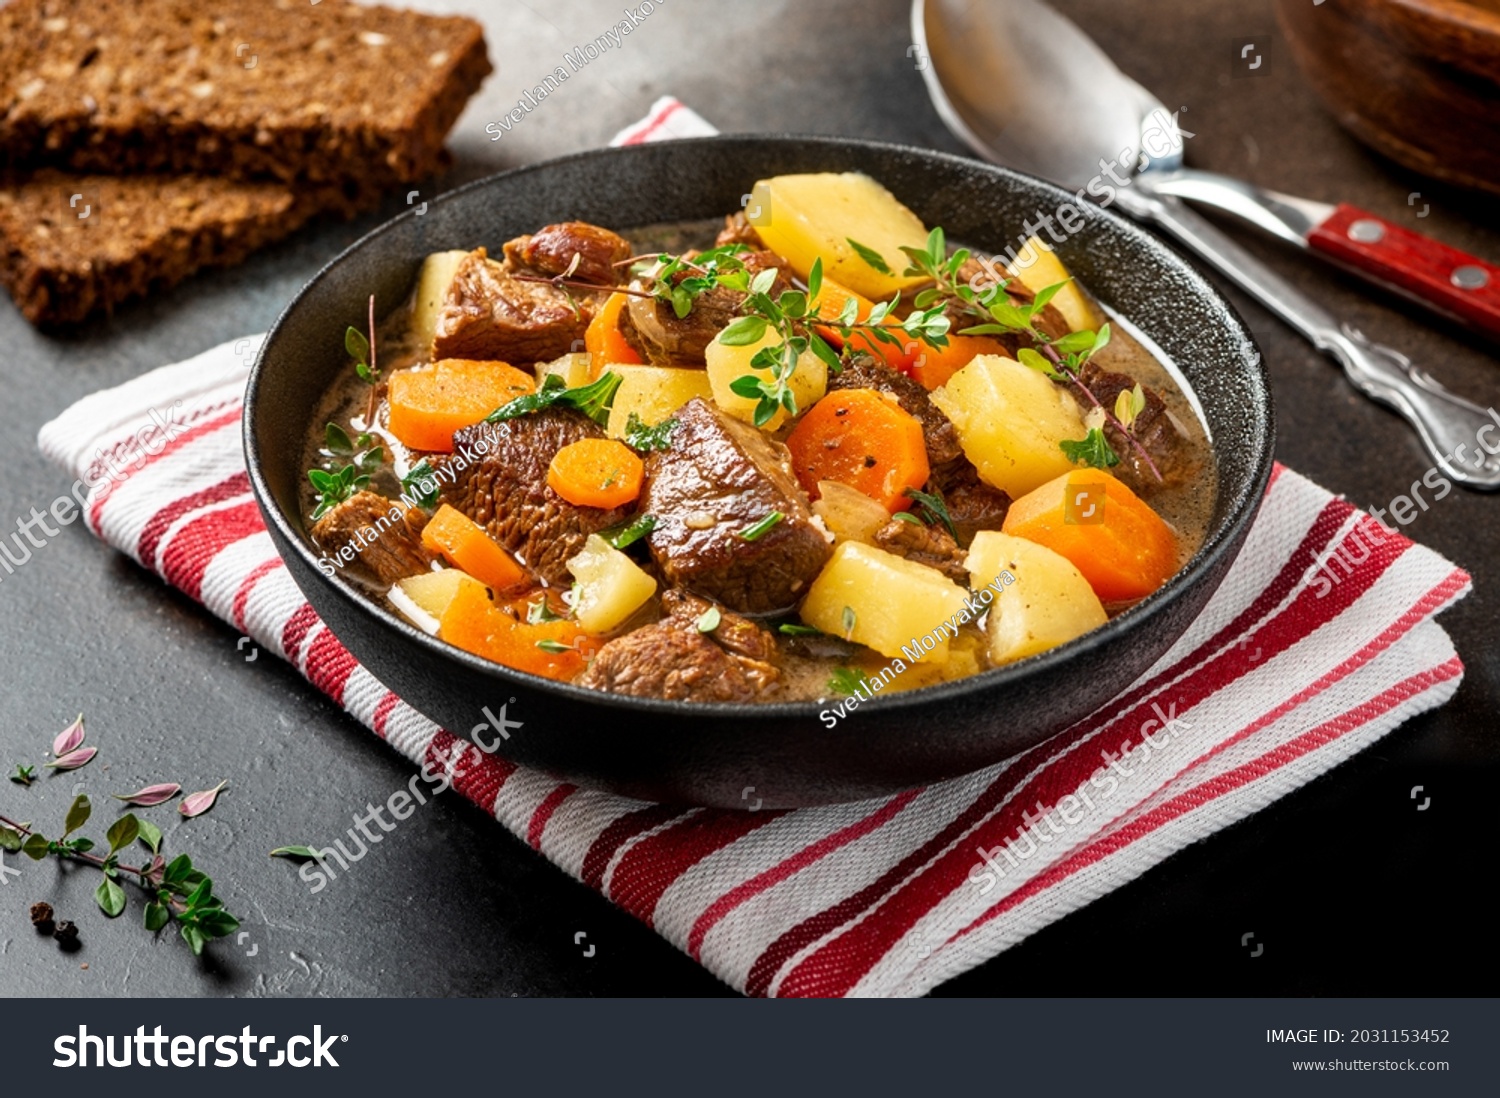 Traditional Irish stew in a black bowl on a dark background. Stew of lamb, potatoes, onions, carrots, and thyme. Traditional dish of St. Patrick's Day. #2031153452